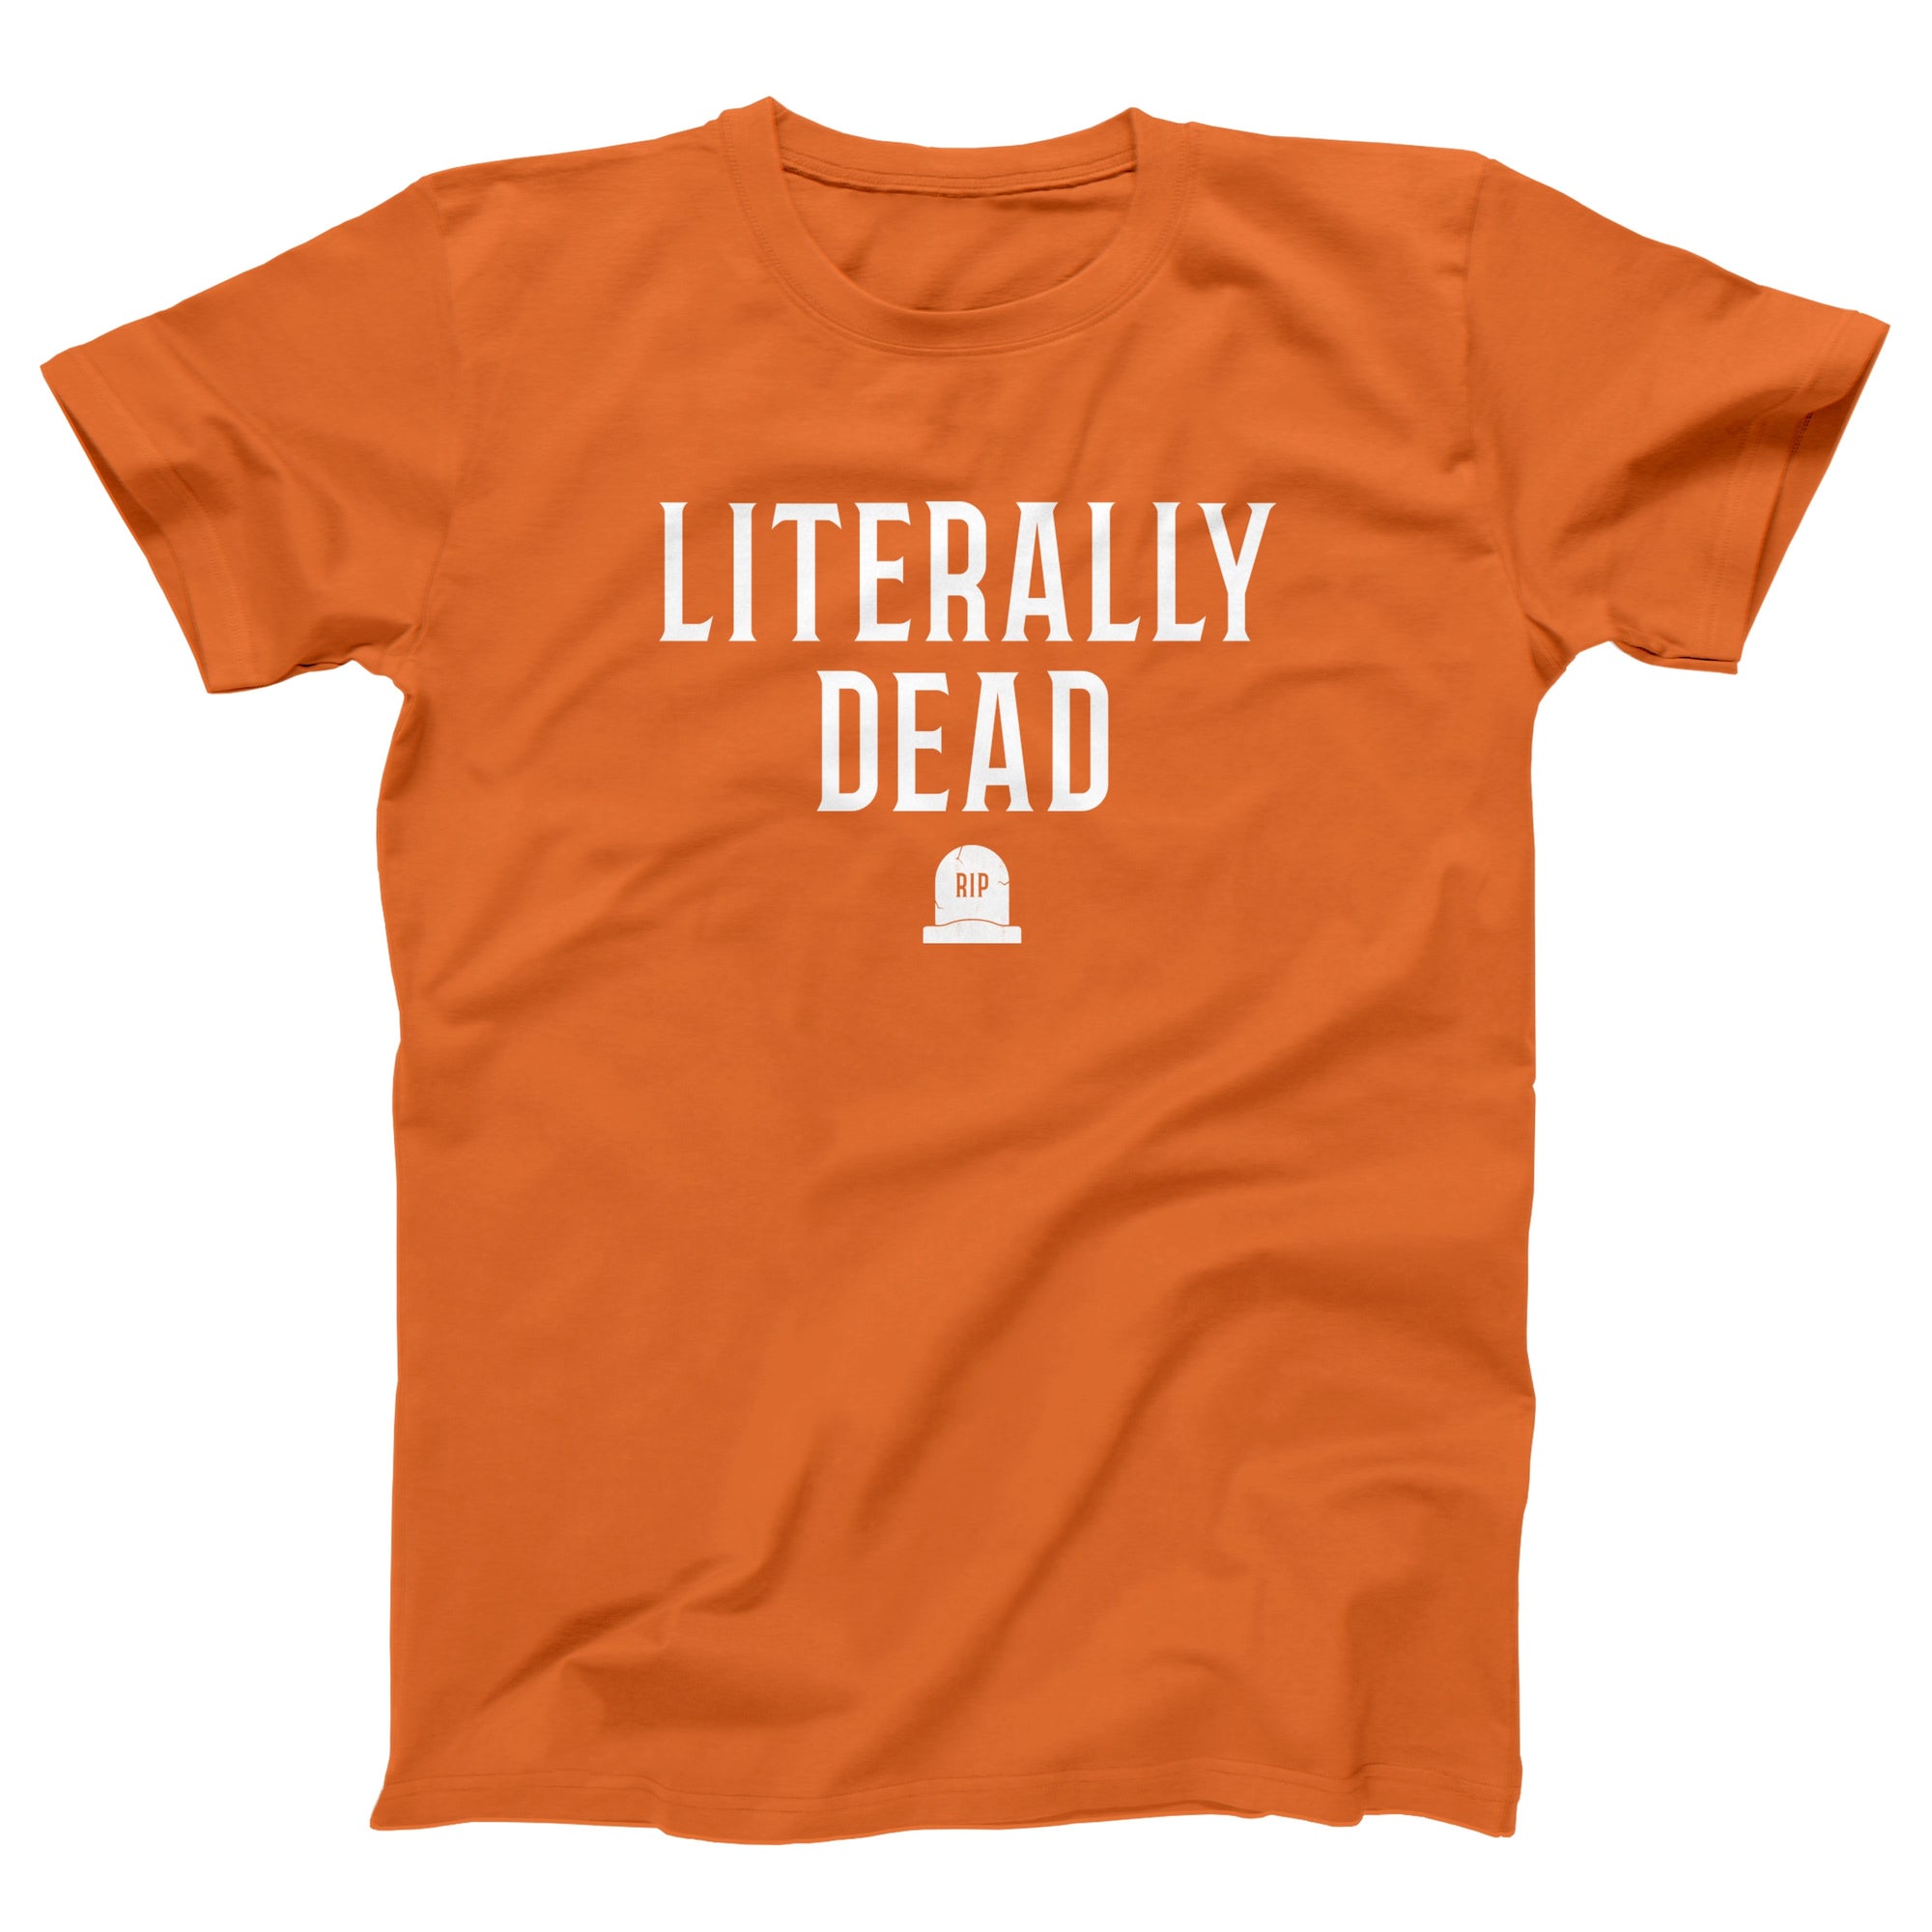 Literally Dead Adult Unisex T Shirt Funny And Sarcastic T Shirts And Apparel 0962